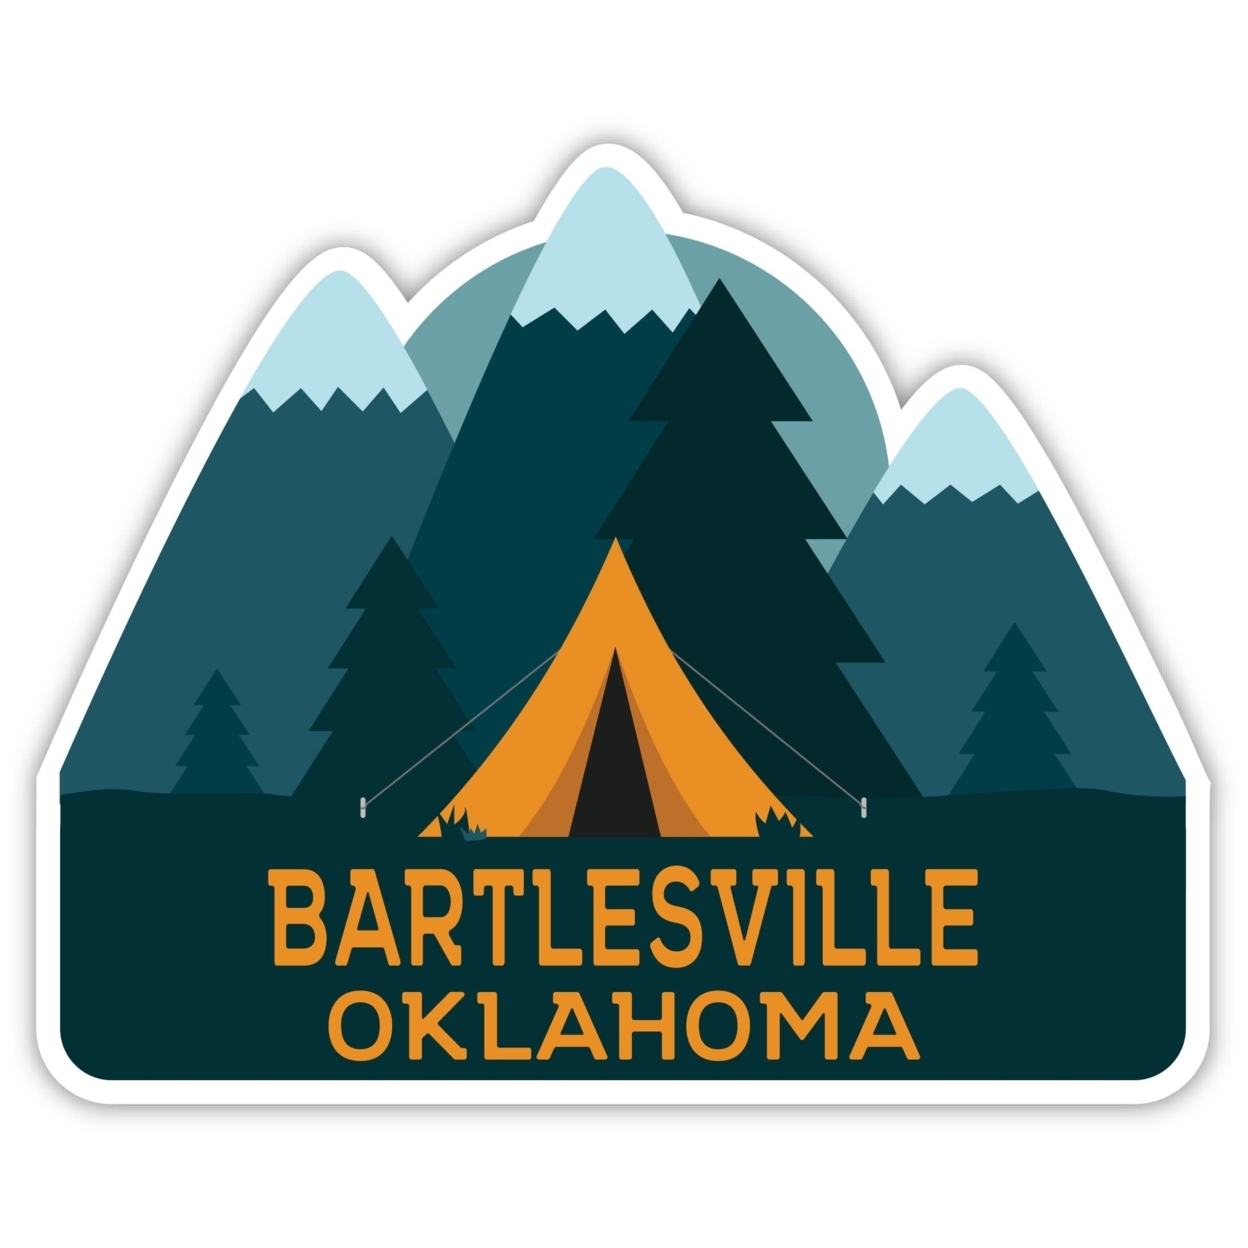 Bartlesville Oklahoma Souvenir Decorative Stickers (Choose Theme And Size) - 4-Pack, 4-Inch, Tent